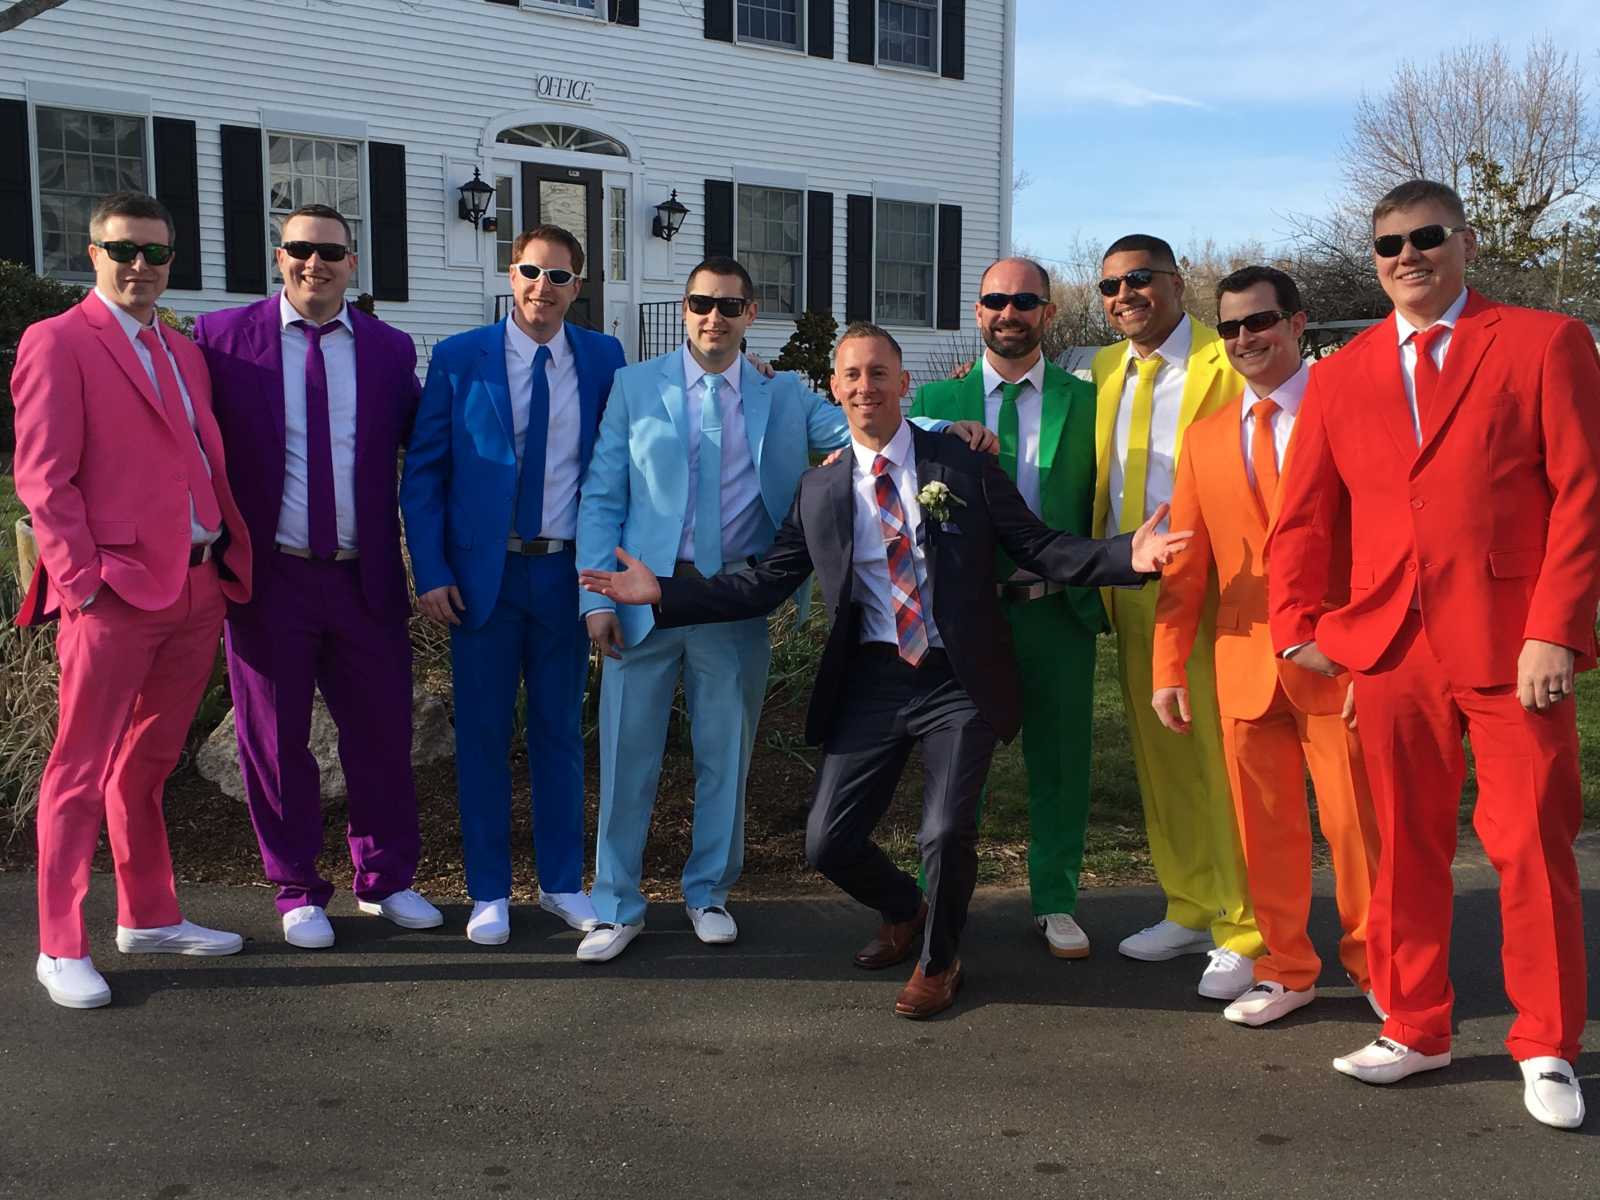 Groom squats and poses with friends in rainbow colored suits smile on either side of him